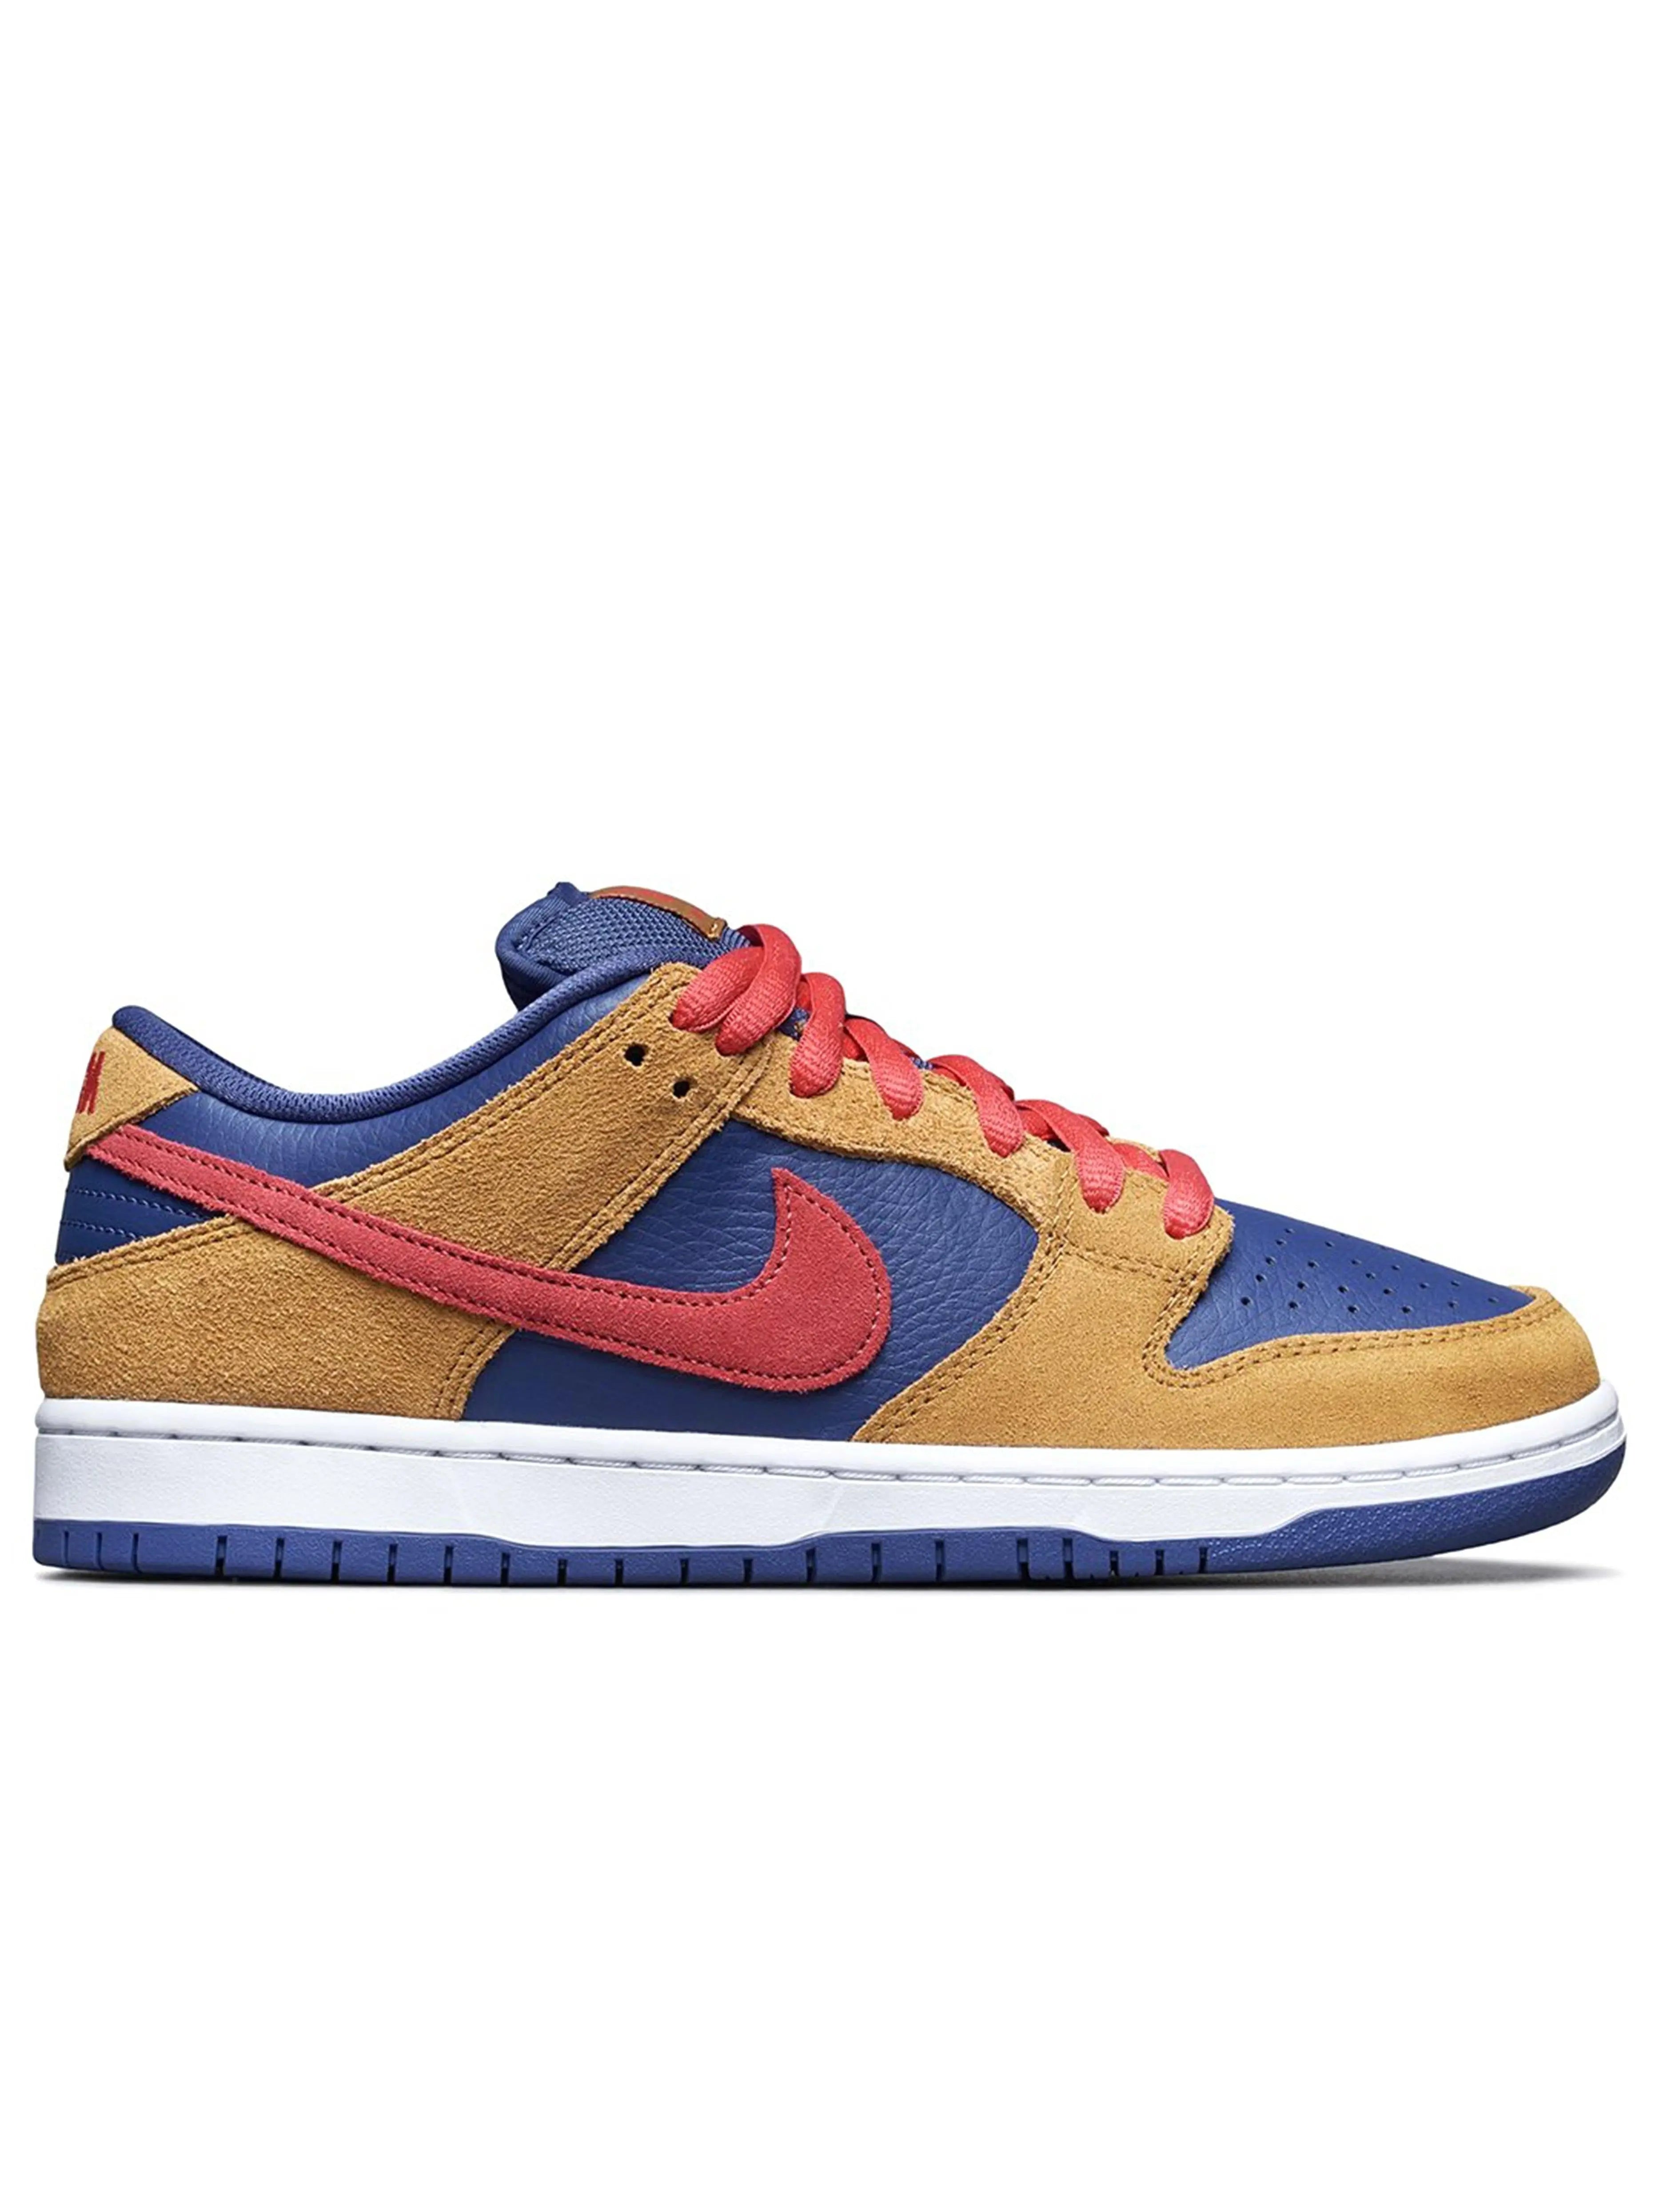 Nike SB Dunk Low Reverse Papa Bear in Auckland, New Zealand - Prior